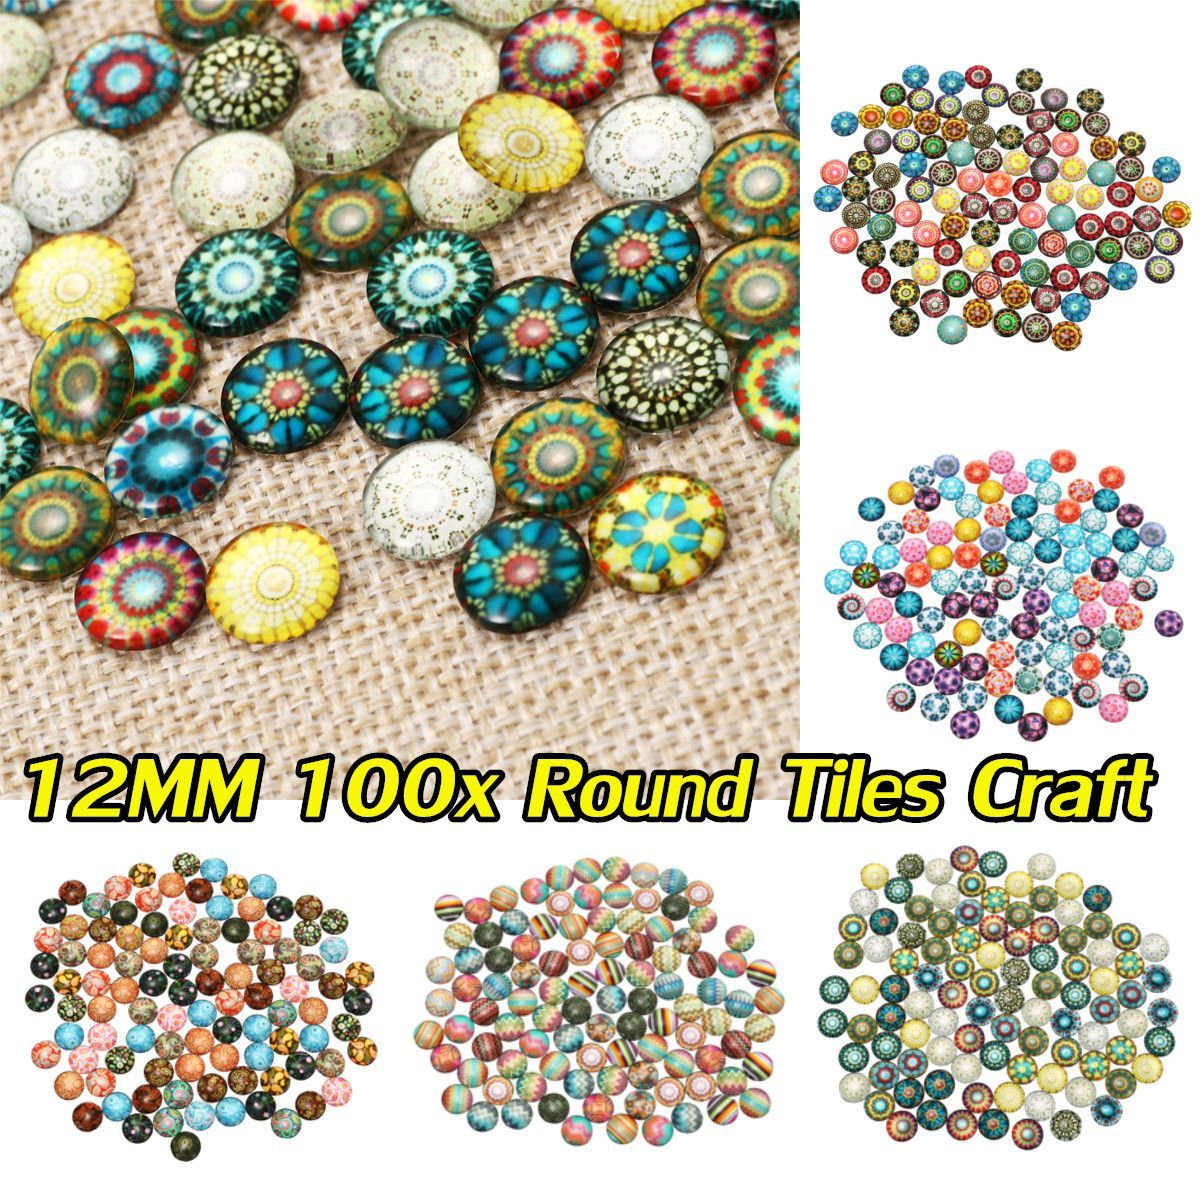 100PcsSet-12MM-Round-Mixed-Supplies-Crafted-Handcrafted-Tiles-For-Jewelry-Making-Decorations-1532872